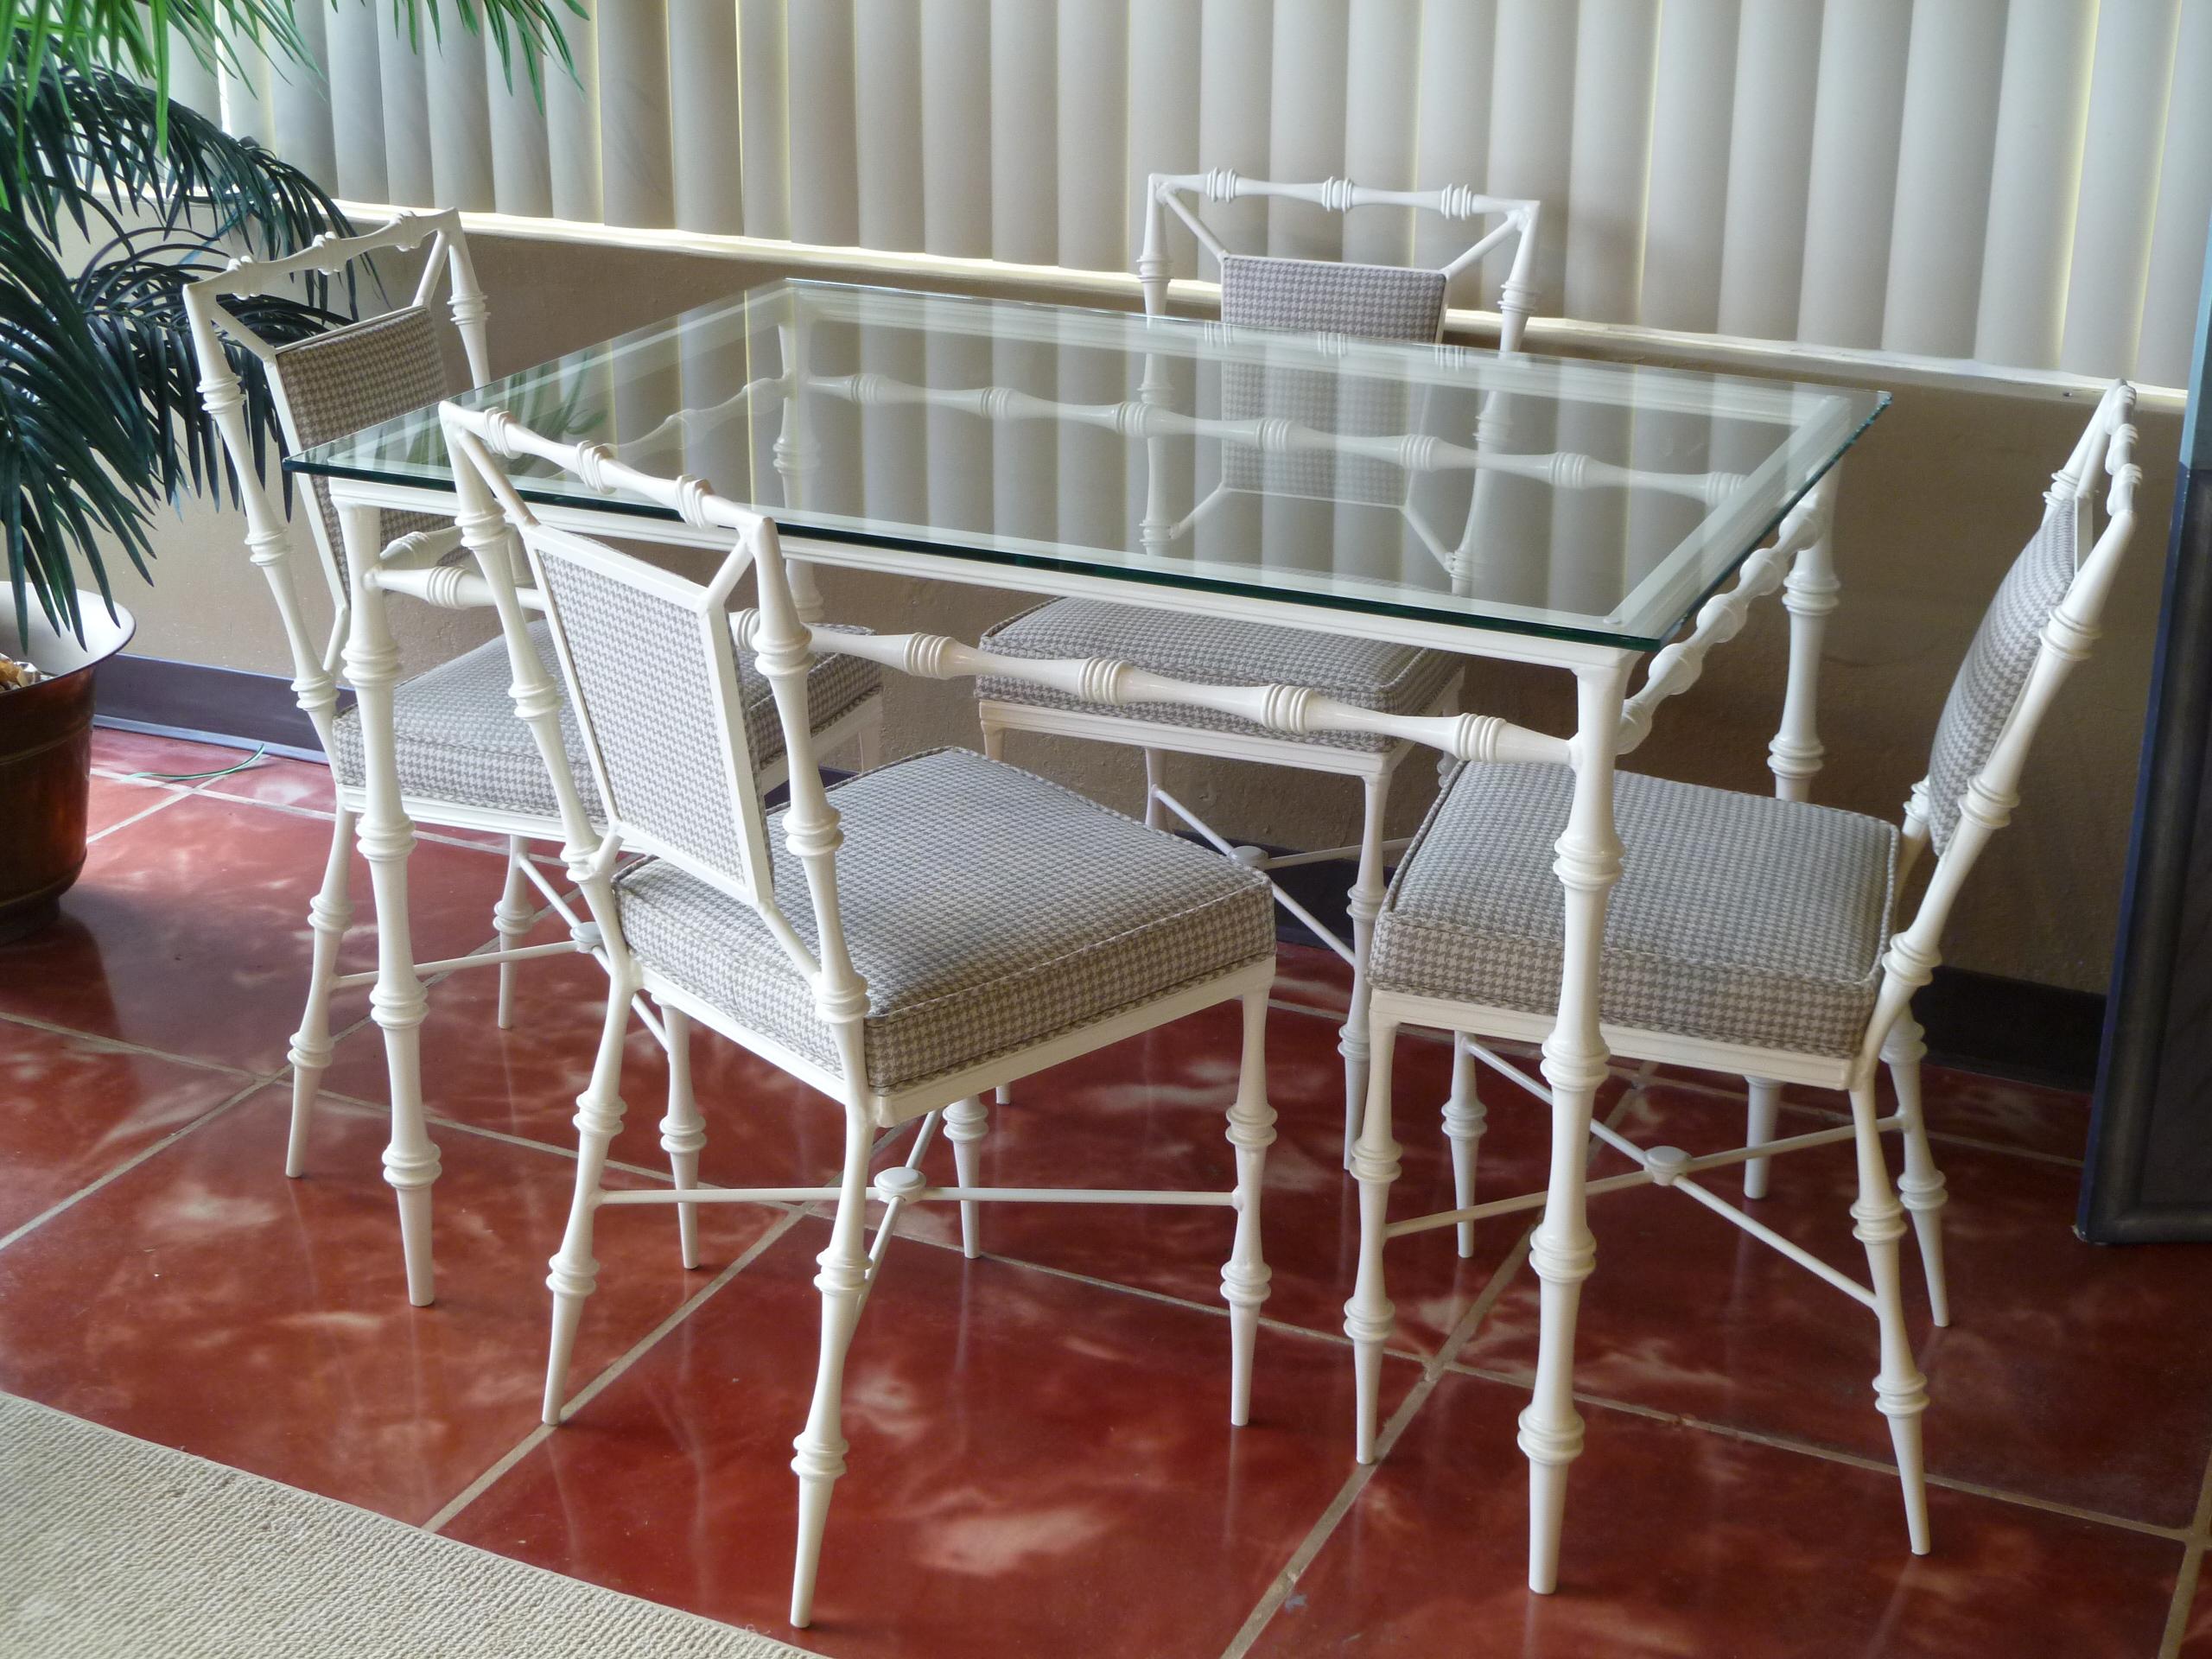 REDUCED FROM $3,500....Great for the outdoors, garden patio or inside dining, this Mid-Century Modern glass top table and chairs are unique and stylish. Featuring four chairs and a table with a stylized take on chinoiserie and faux bamboo. The